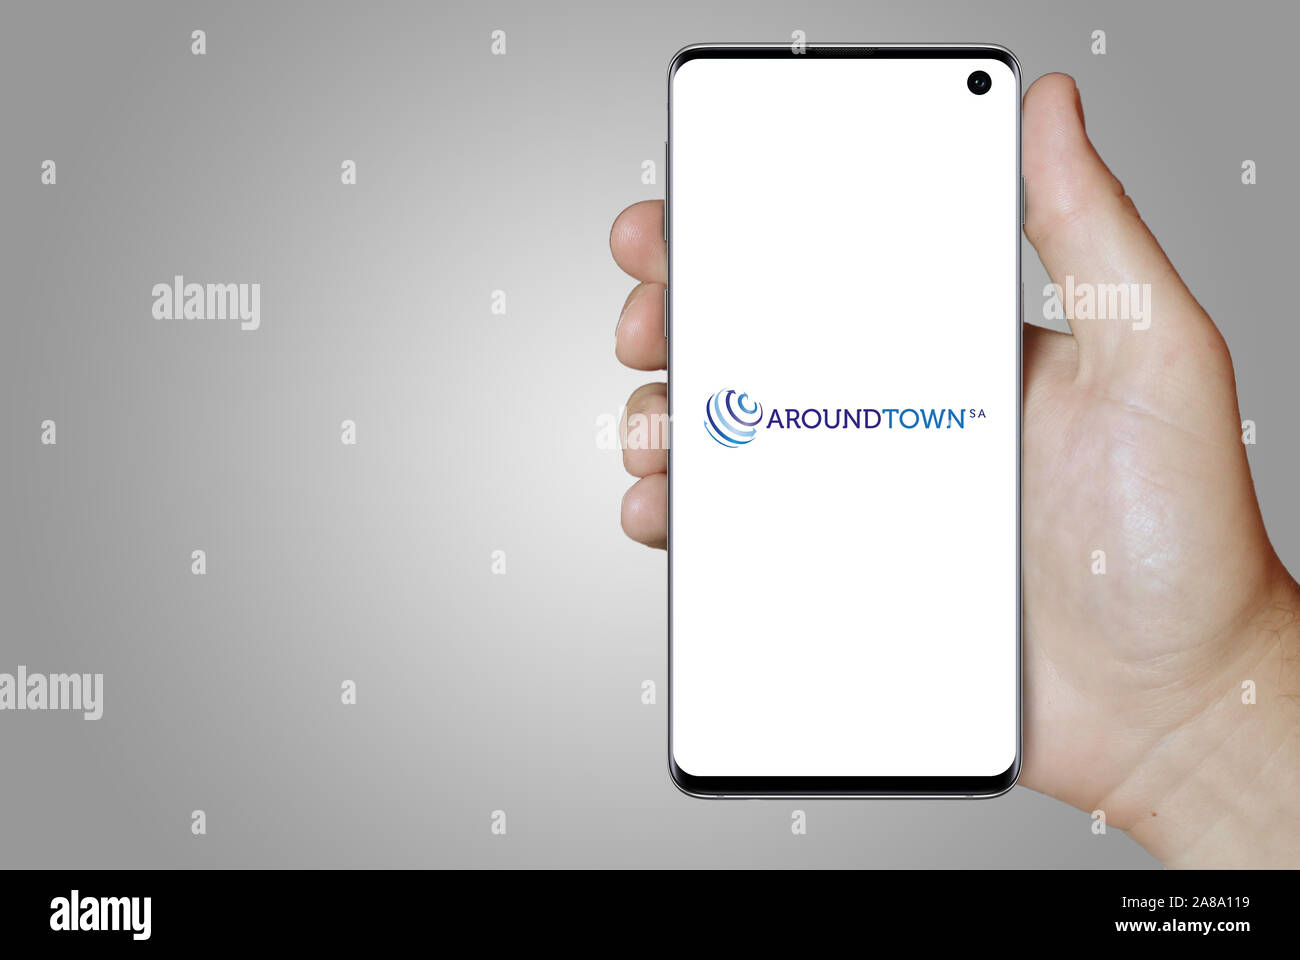 Logo of public company Aroundtown SA displayed on a smartphone. Grey background. Credit: PIXDUCE Stock Photo